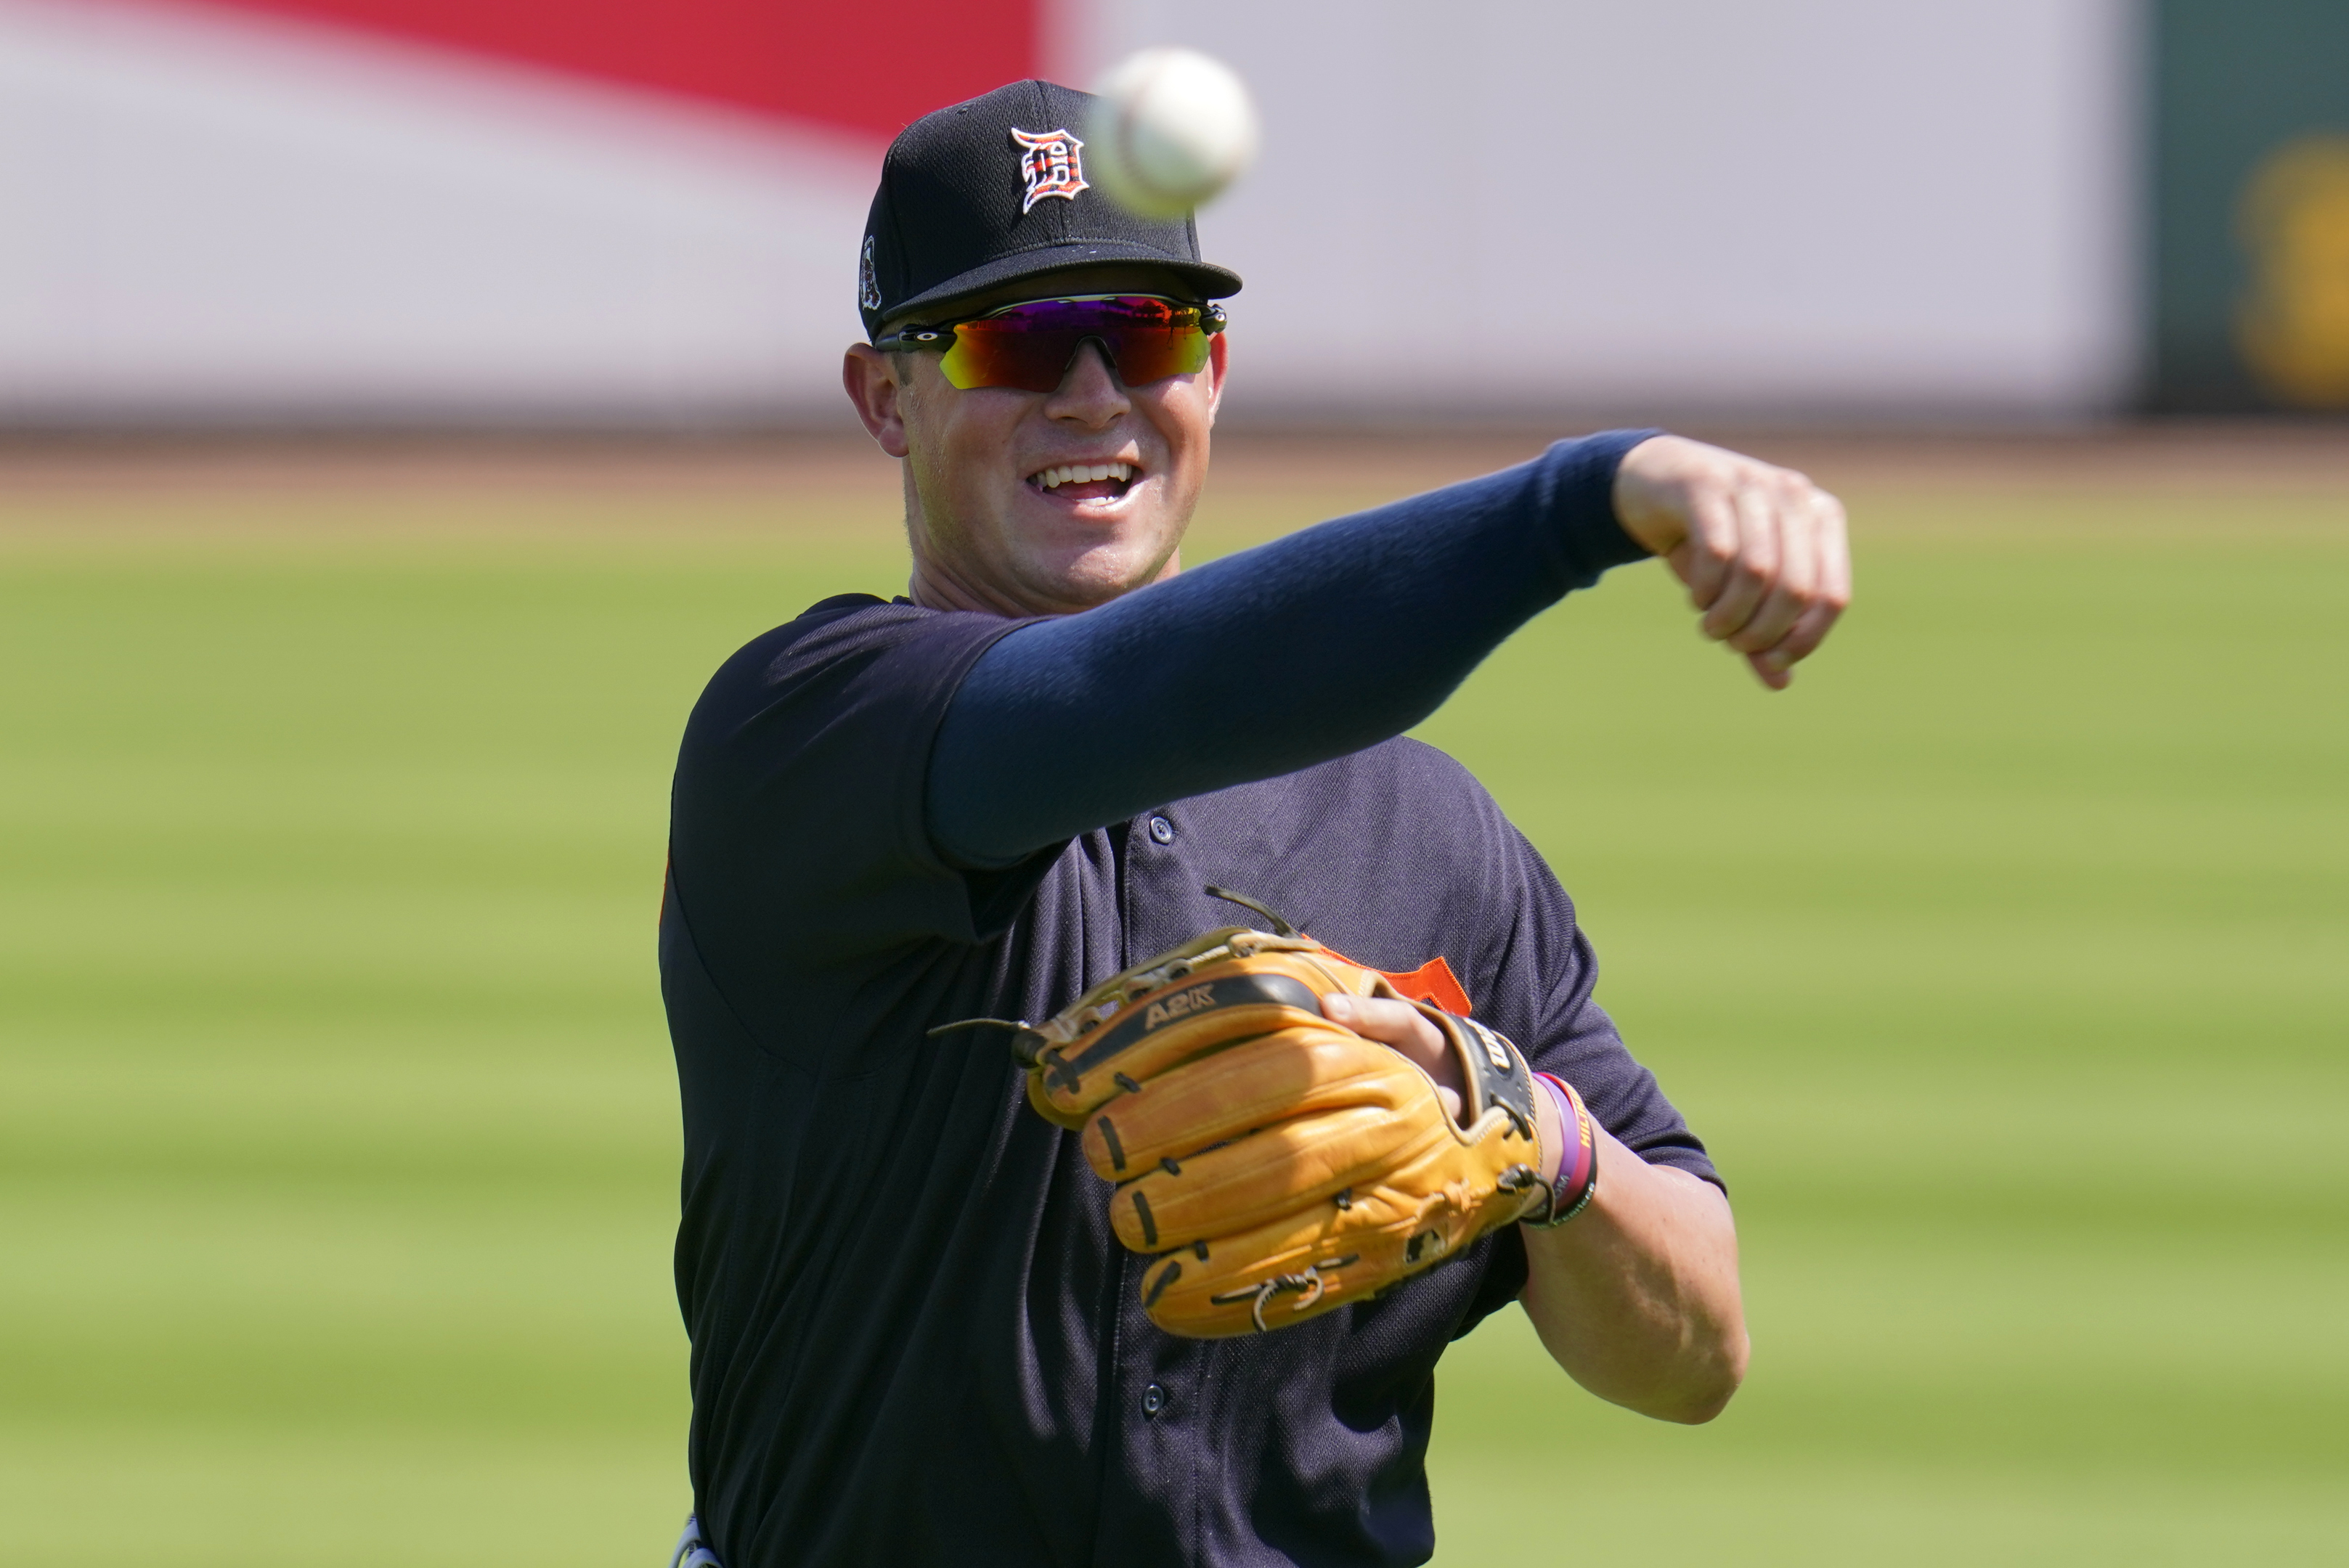 Tigers' No. 1 overall pick Torkelson to play 'a lot of third base' for West  Michigan Whitecaps 